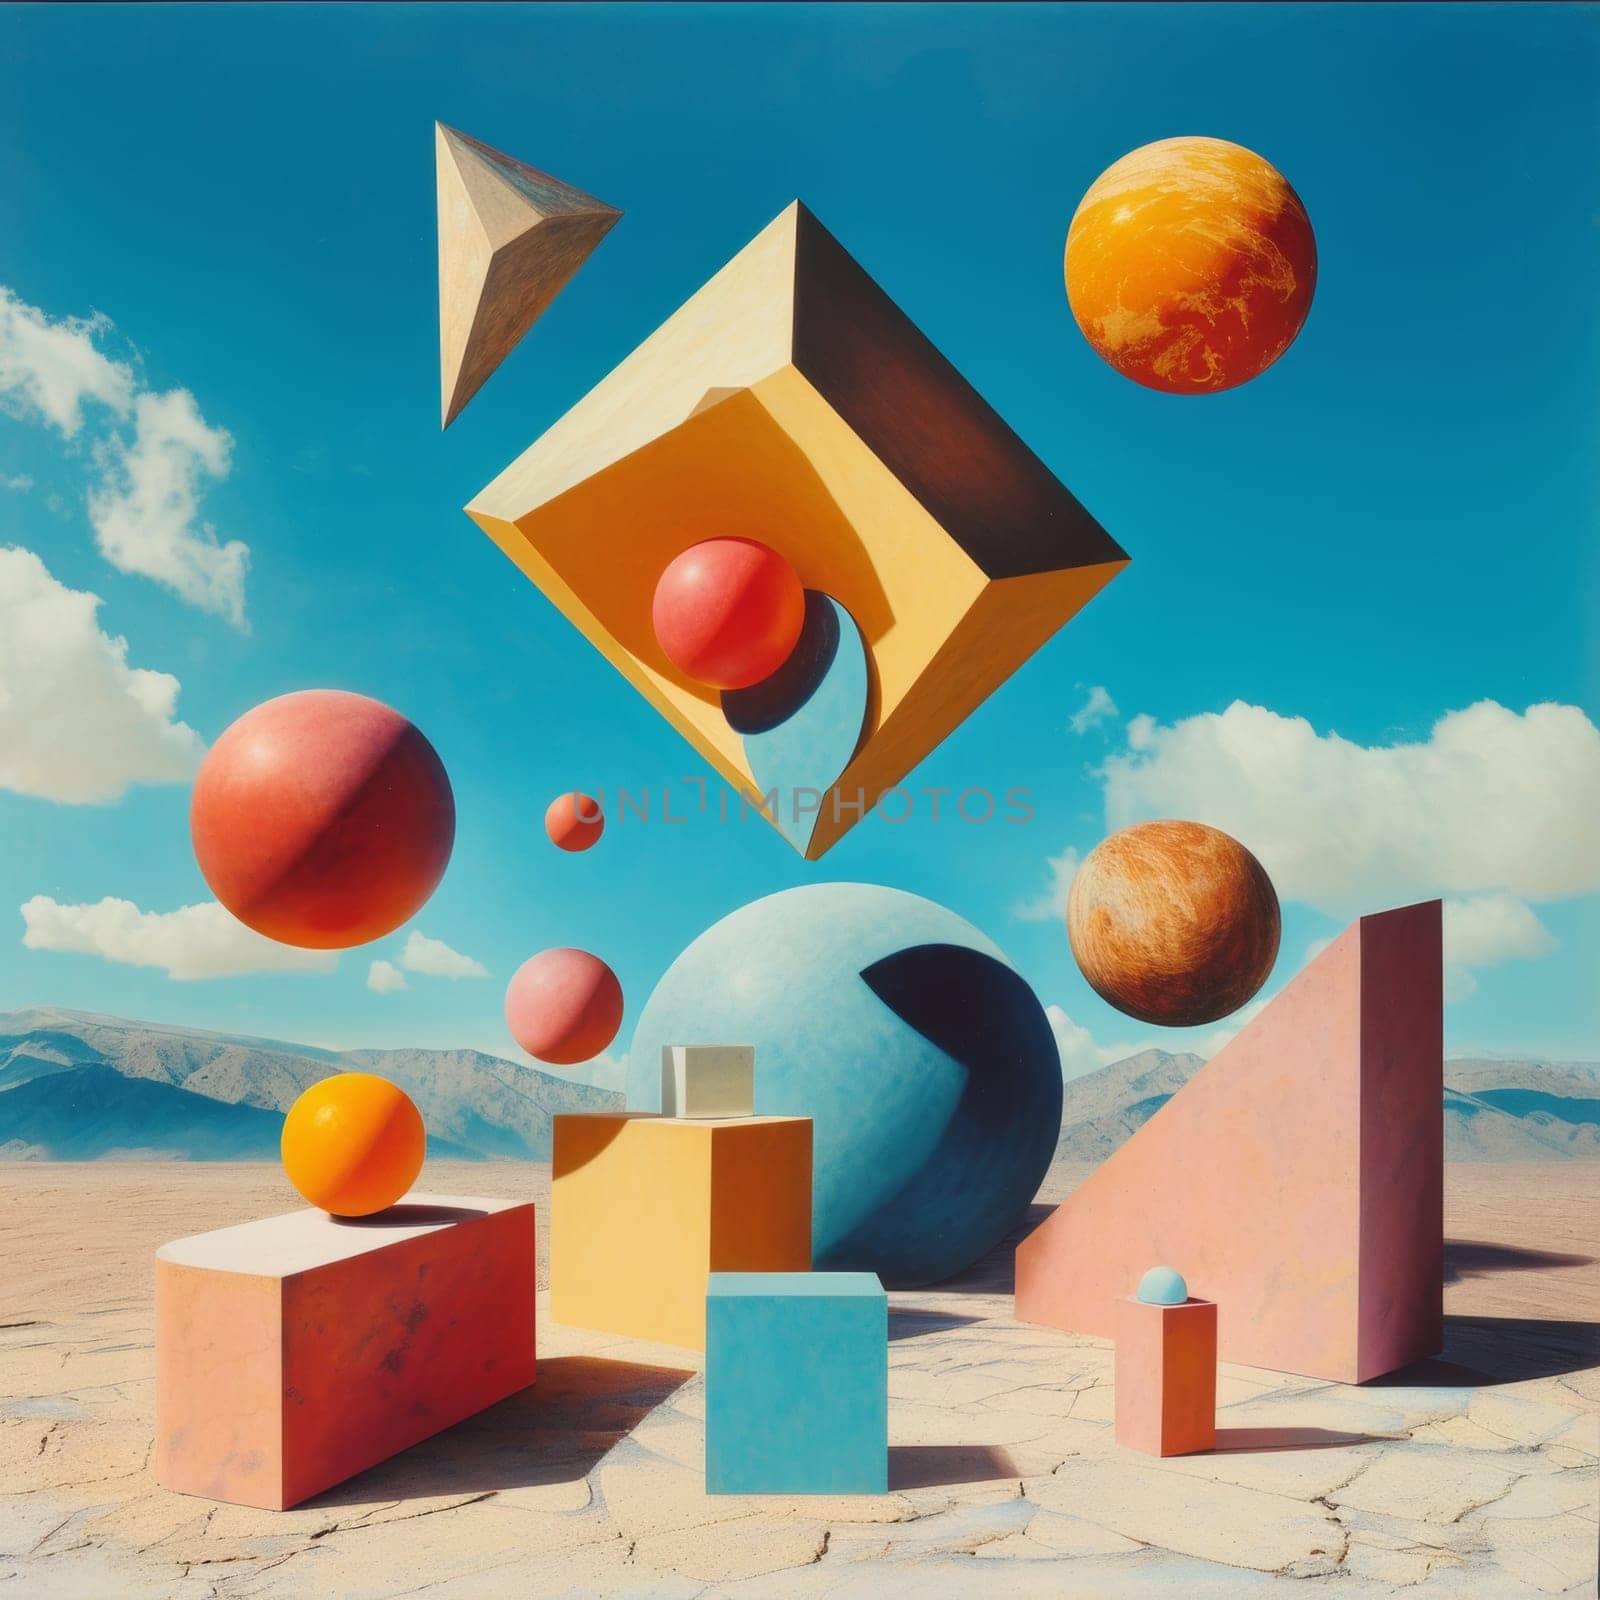 A painting of a large number of cubes and spheres in the desert